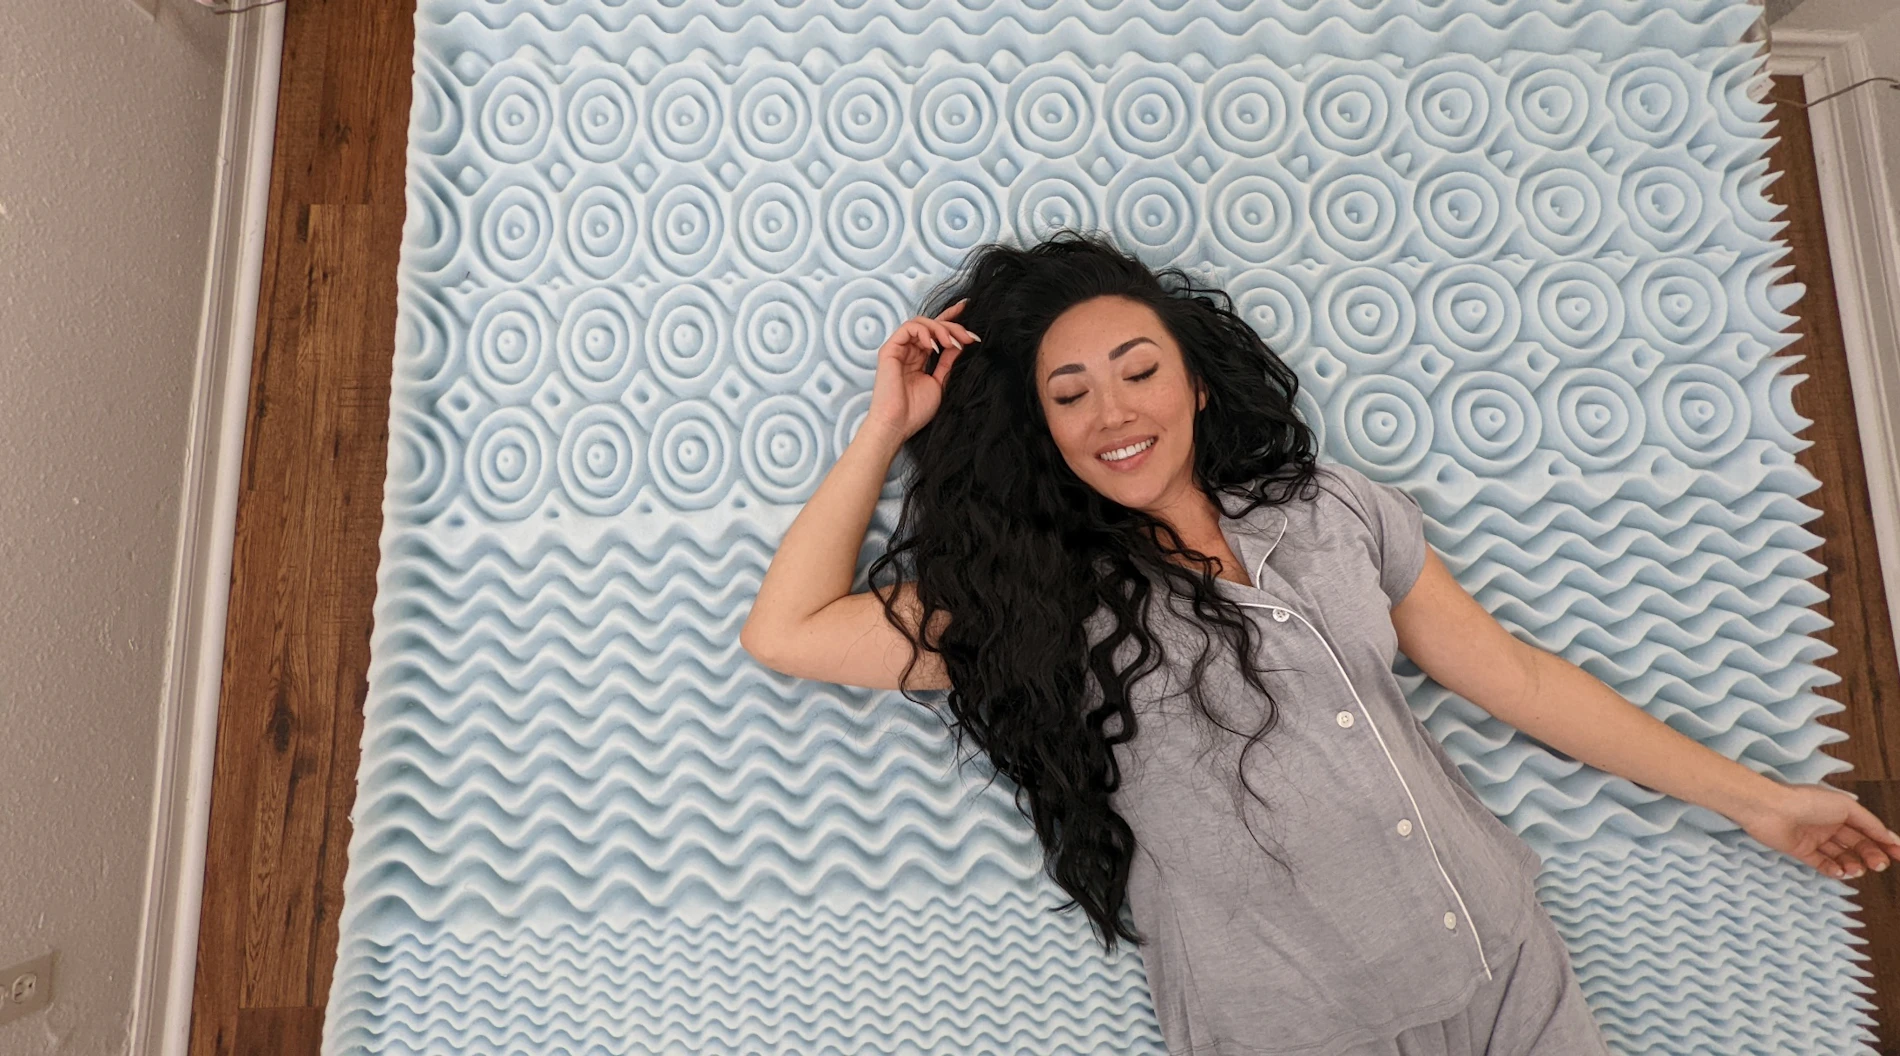 Woman demonstrates how to properly use a mattress topper, with the textured "comfort zones" facing up